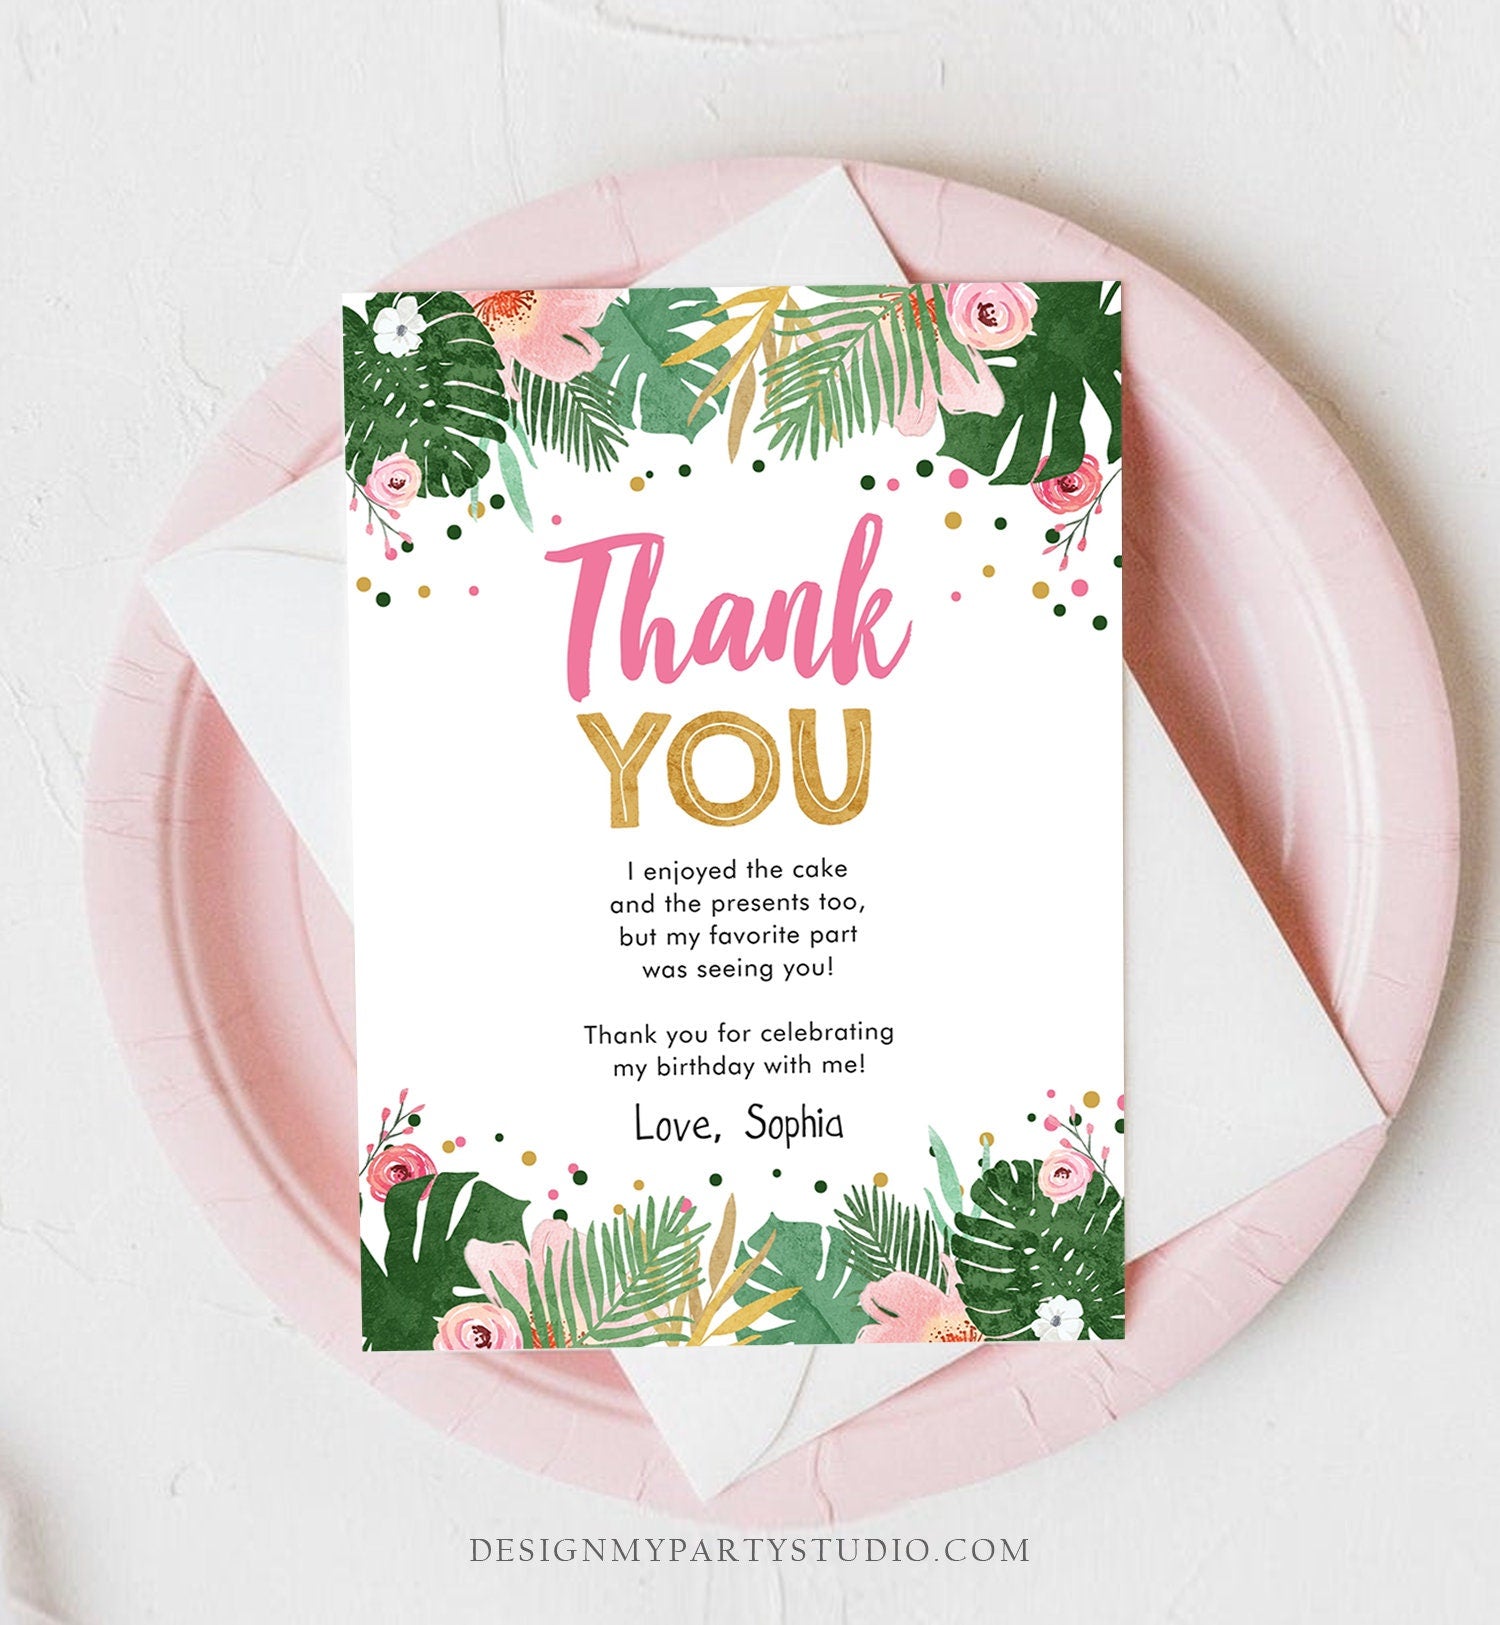 Editable Thank You Card Safari Wild One Two Wild and Three Wild Things Thank You Note Black Gold Photo Girl Pink Jungle Corjl Template 0332